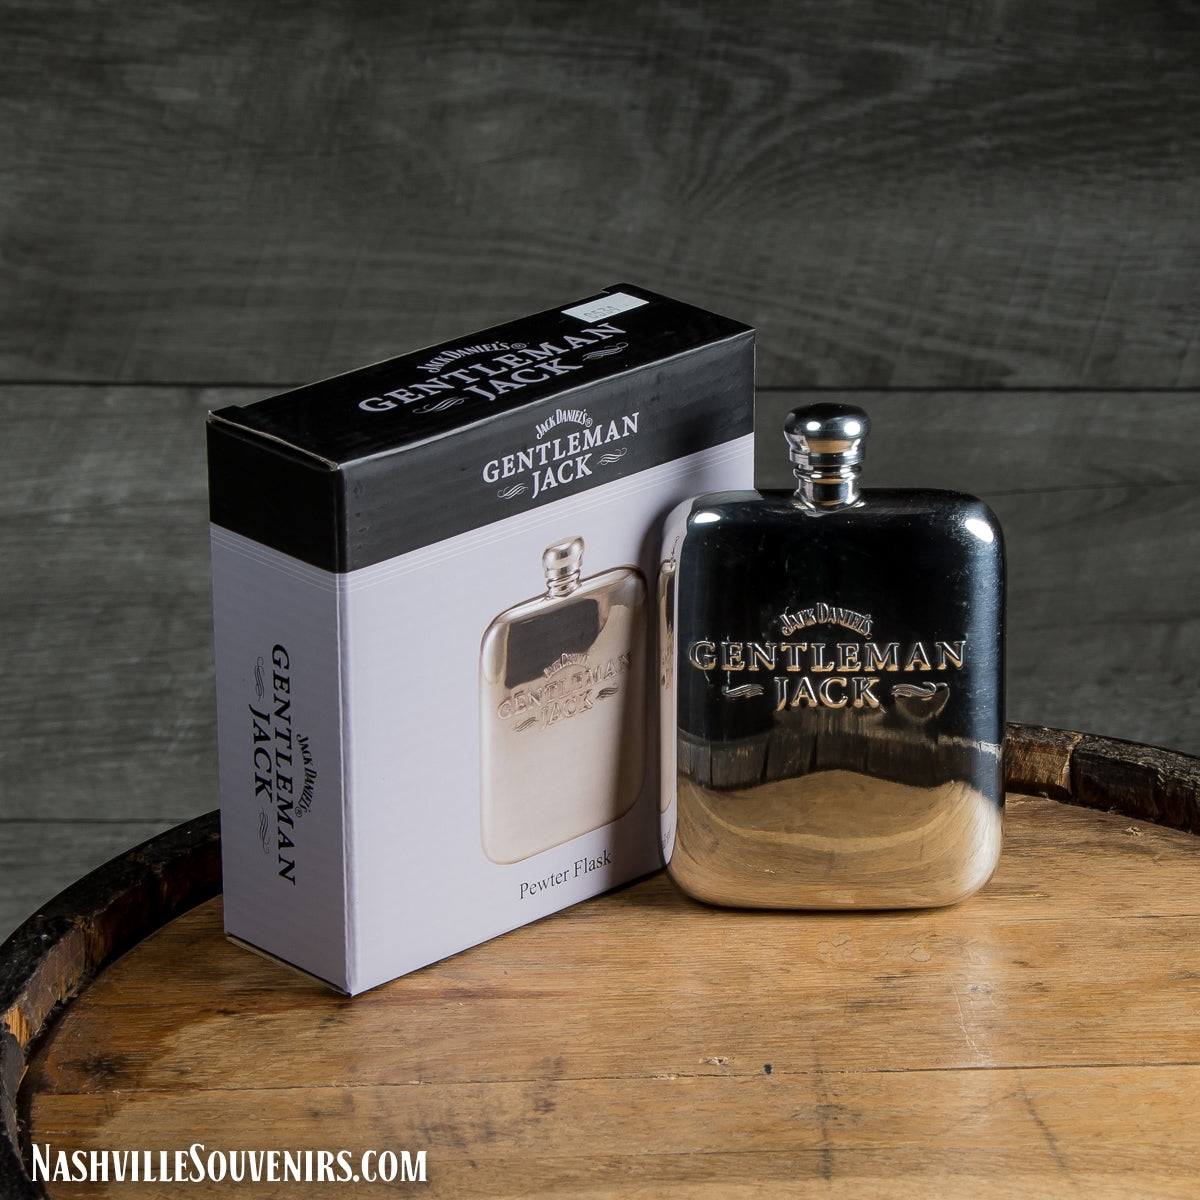 Officially licensed Jack Daniels Gentleman Jack Pewter Flask from Sheffield England. FREE SHIPPING on all US orders over $75!